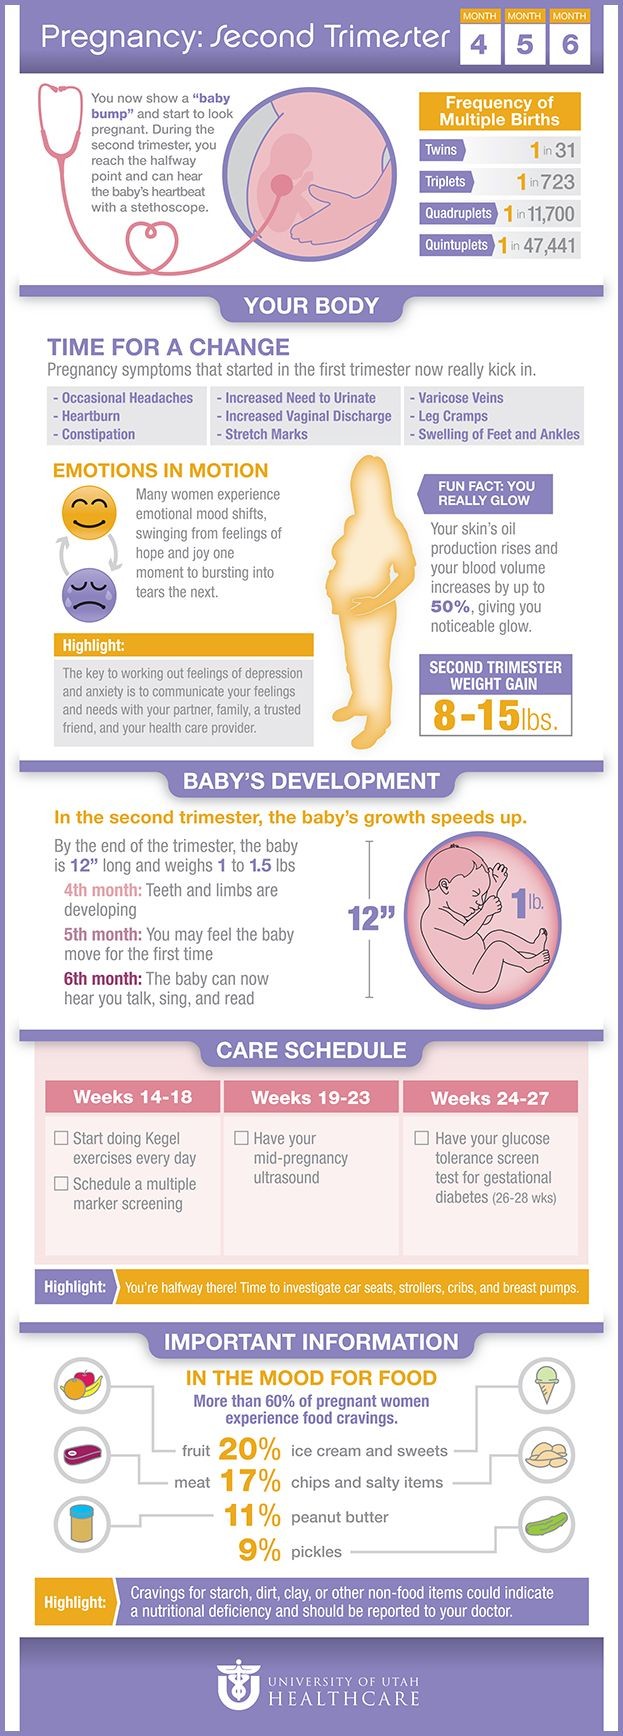 Facts about the second trimester of pregnancy | Un...